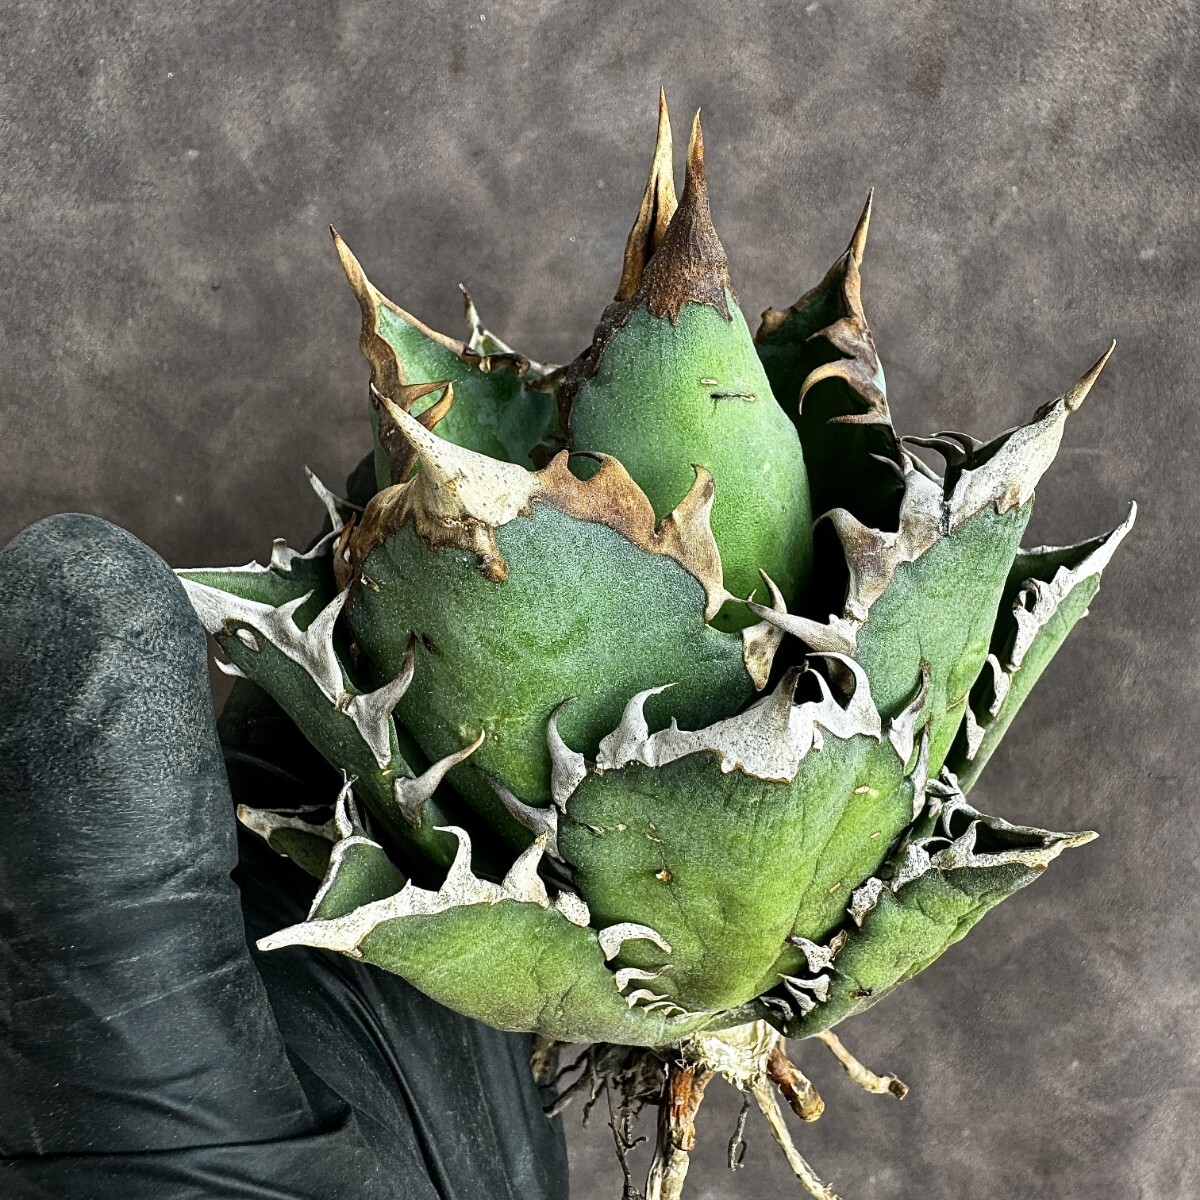 [Lj_plants]H01 agave chitanota red cat we zru red cat ball type a little over . stock beautiful stock 